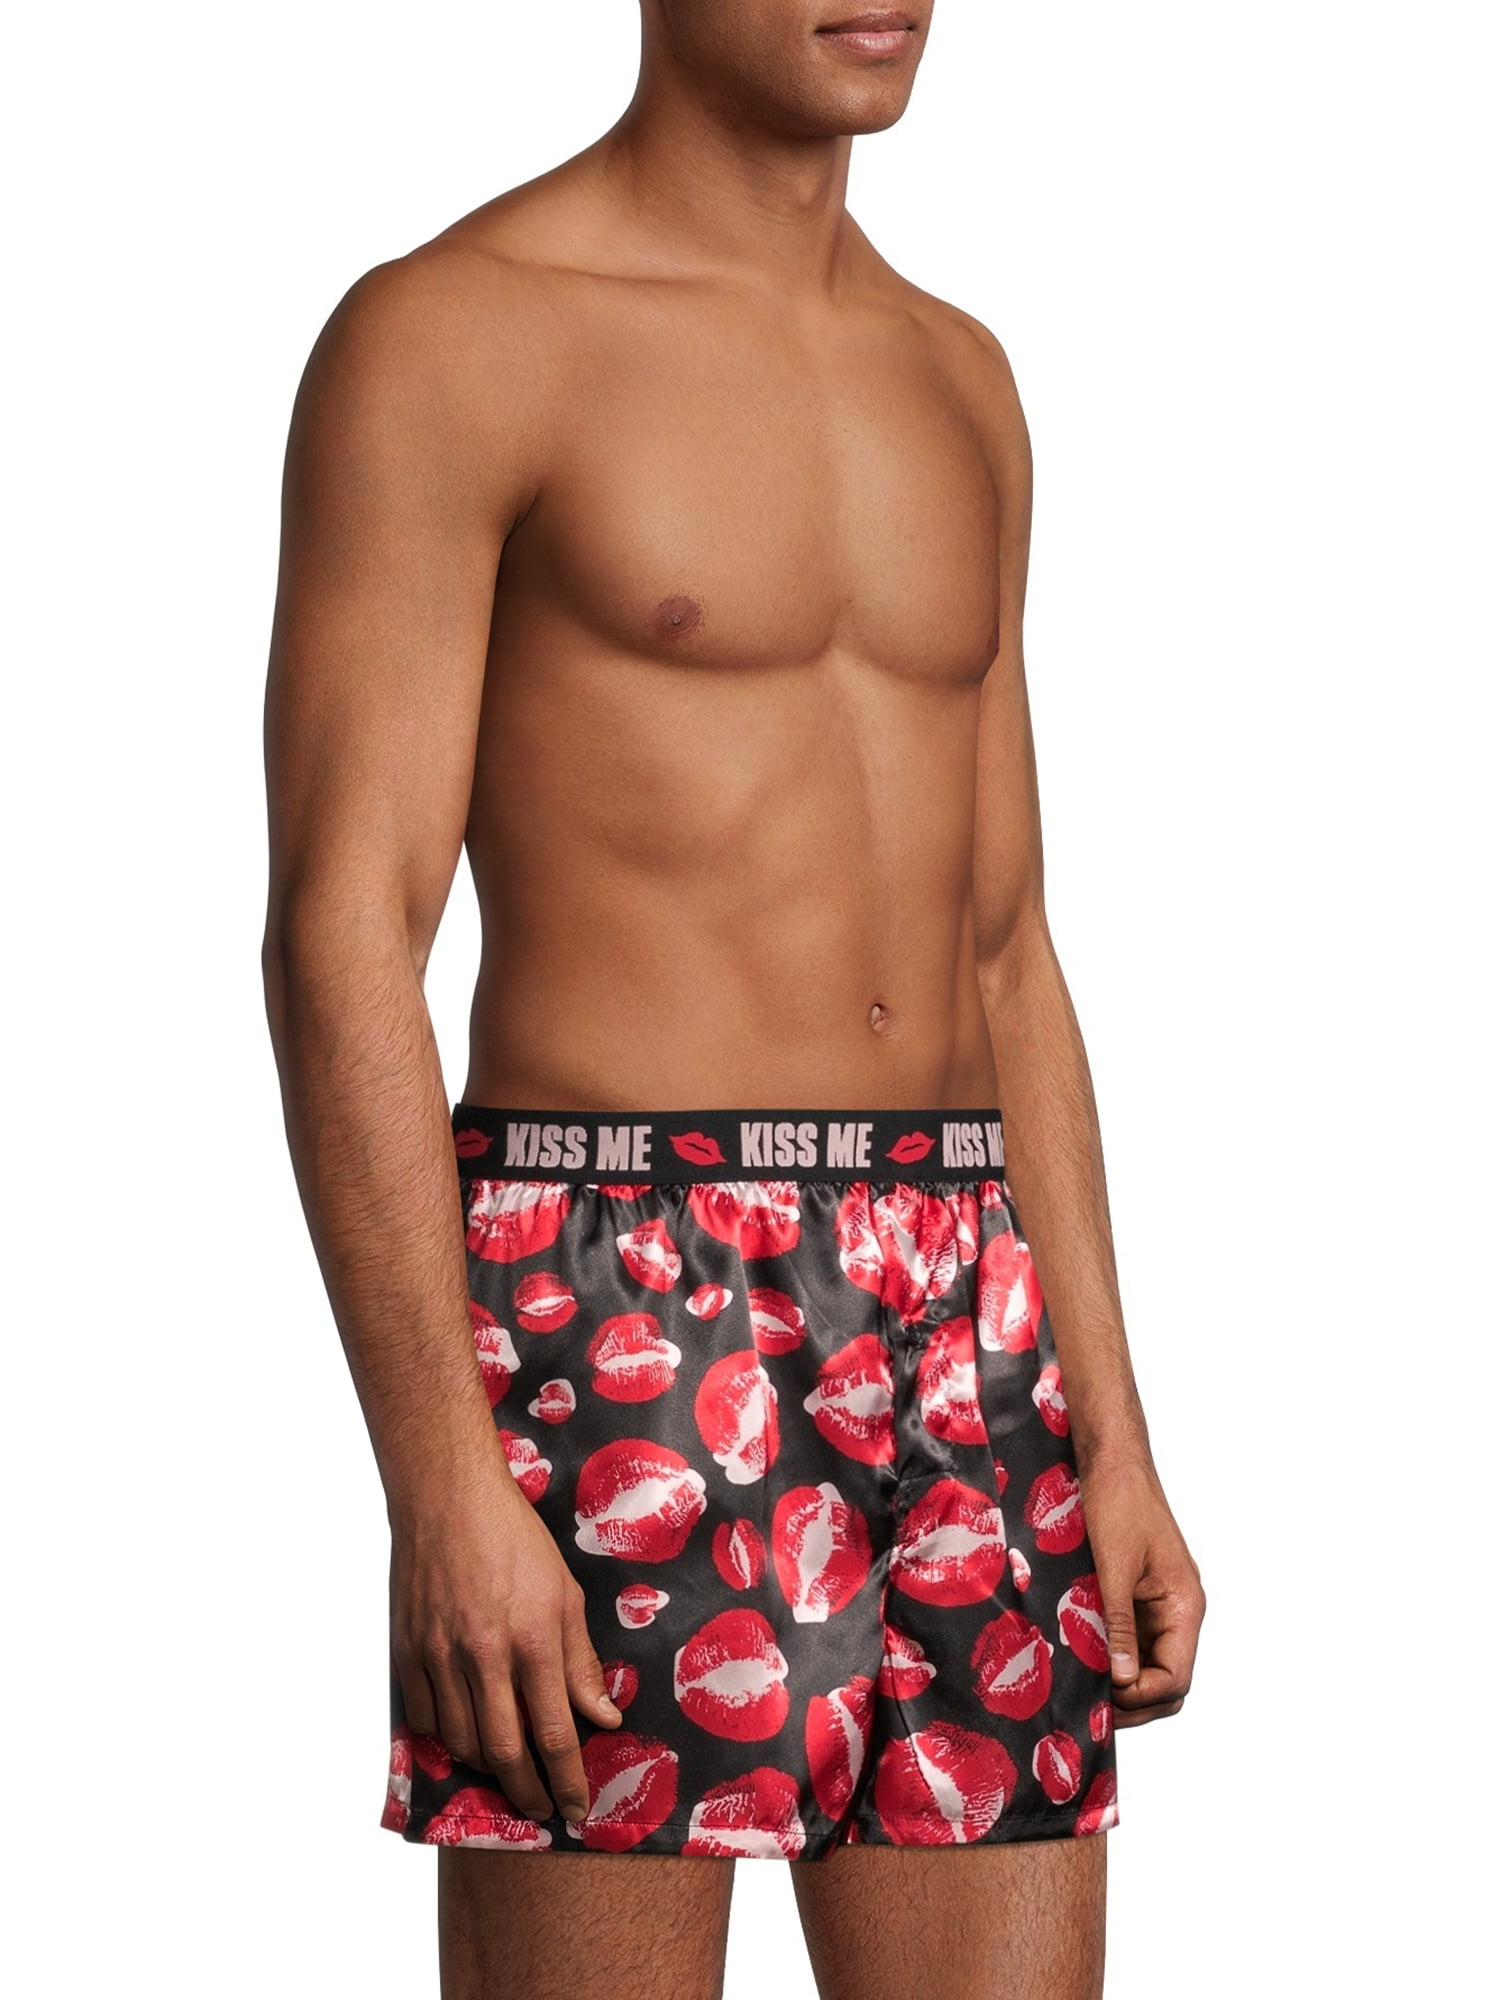 Win Under Armour Boxers in the 'Mark Your Man' Valentine's Giveaway